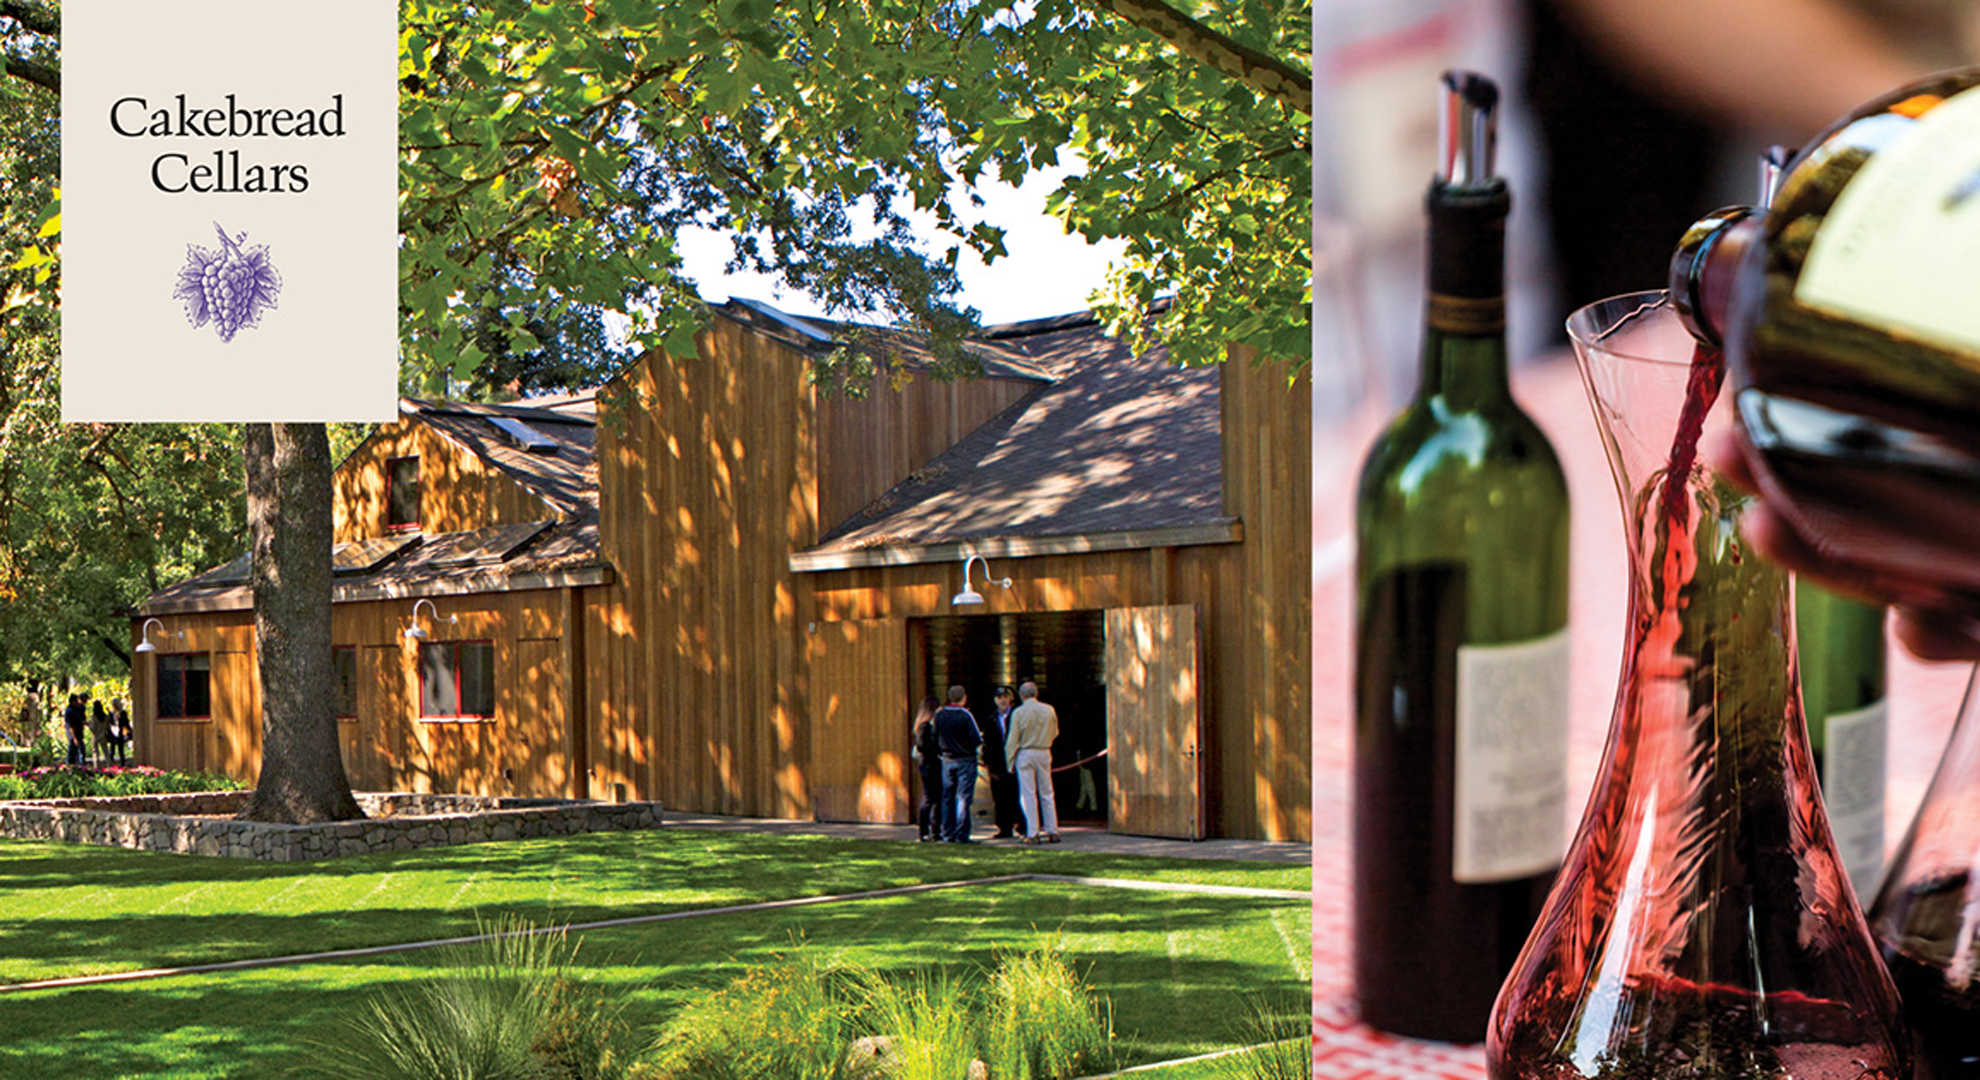 Image of a barn with green grass and people standing outside of it next to an image of red wine being poured into a decanter, featuring the Cakebread Cellars logo.